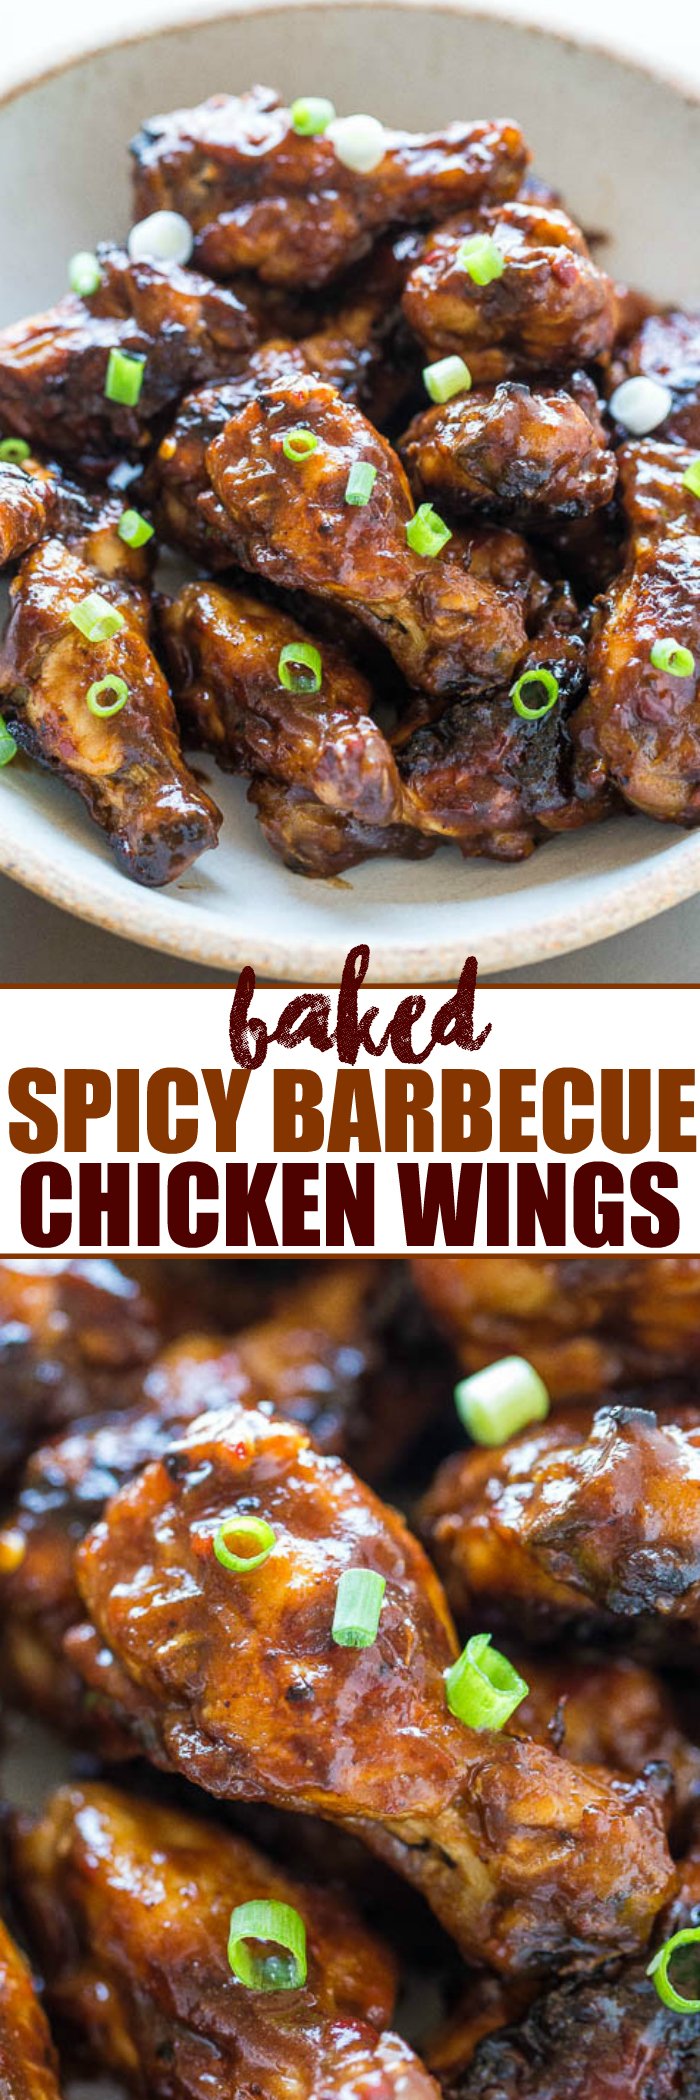 Spicy Baked BBQ Chicken Wings — These baked bbq chicken wings are perfect for entertaining, parties, or whenever you’re craving juicy chicken wings. Bonus: you only need 5 ingredients!